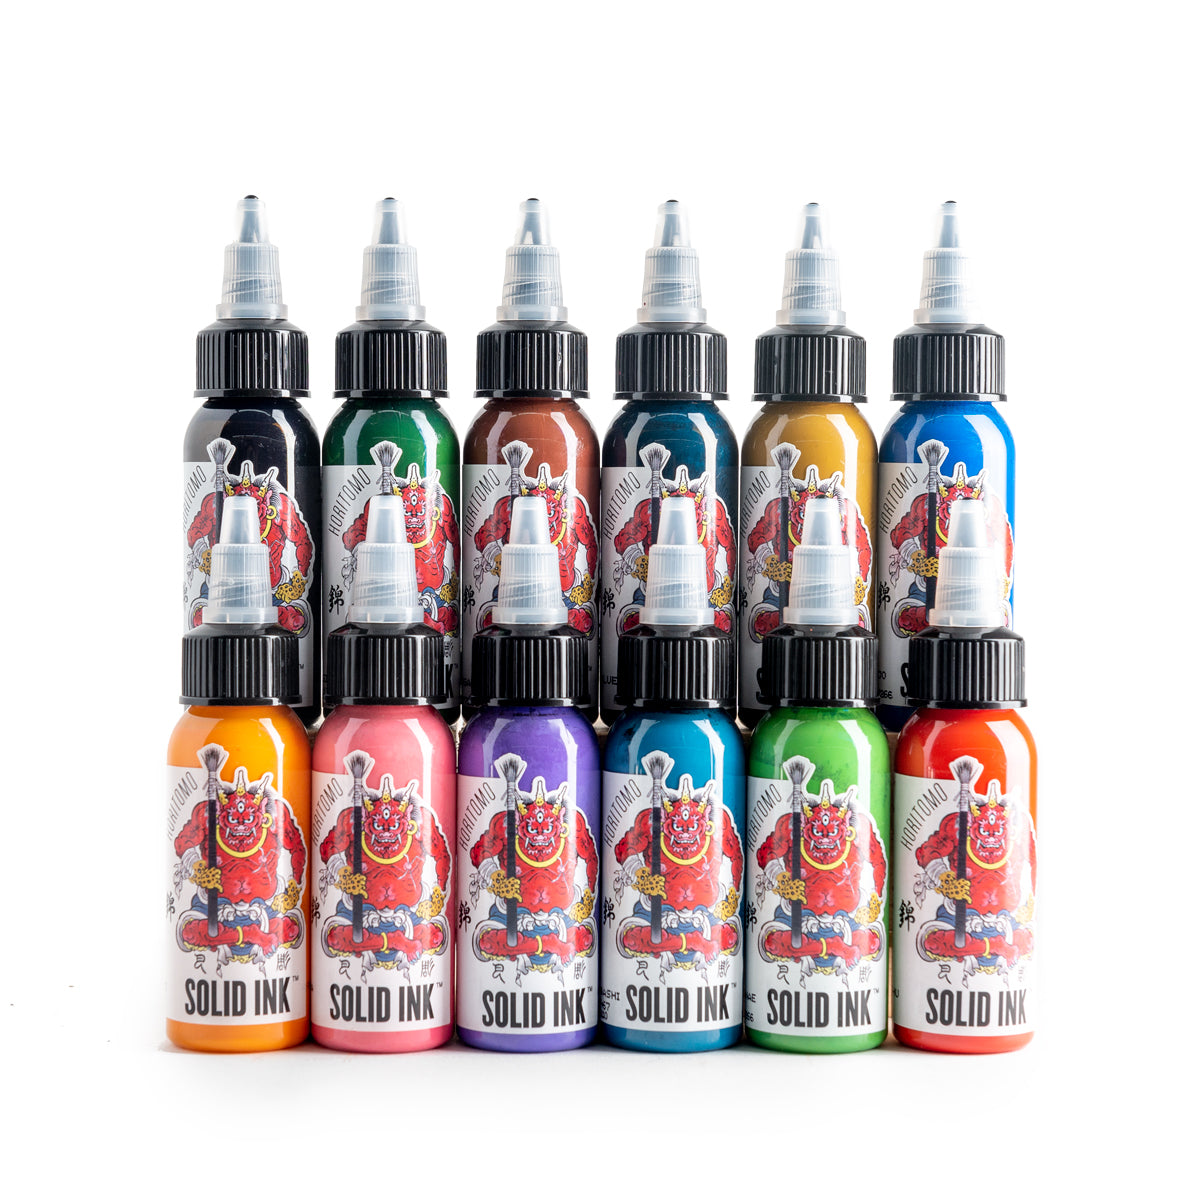 MAX RODRIGUEZ  12 COLOR SET 1 oz for the price of 10